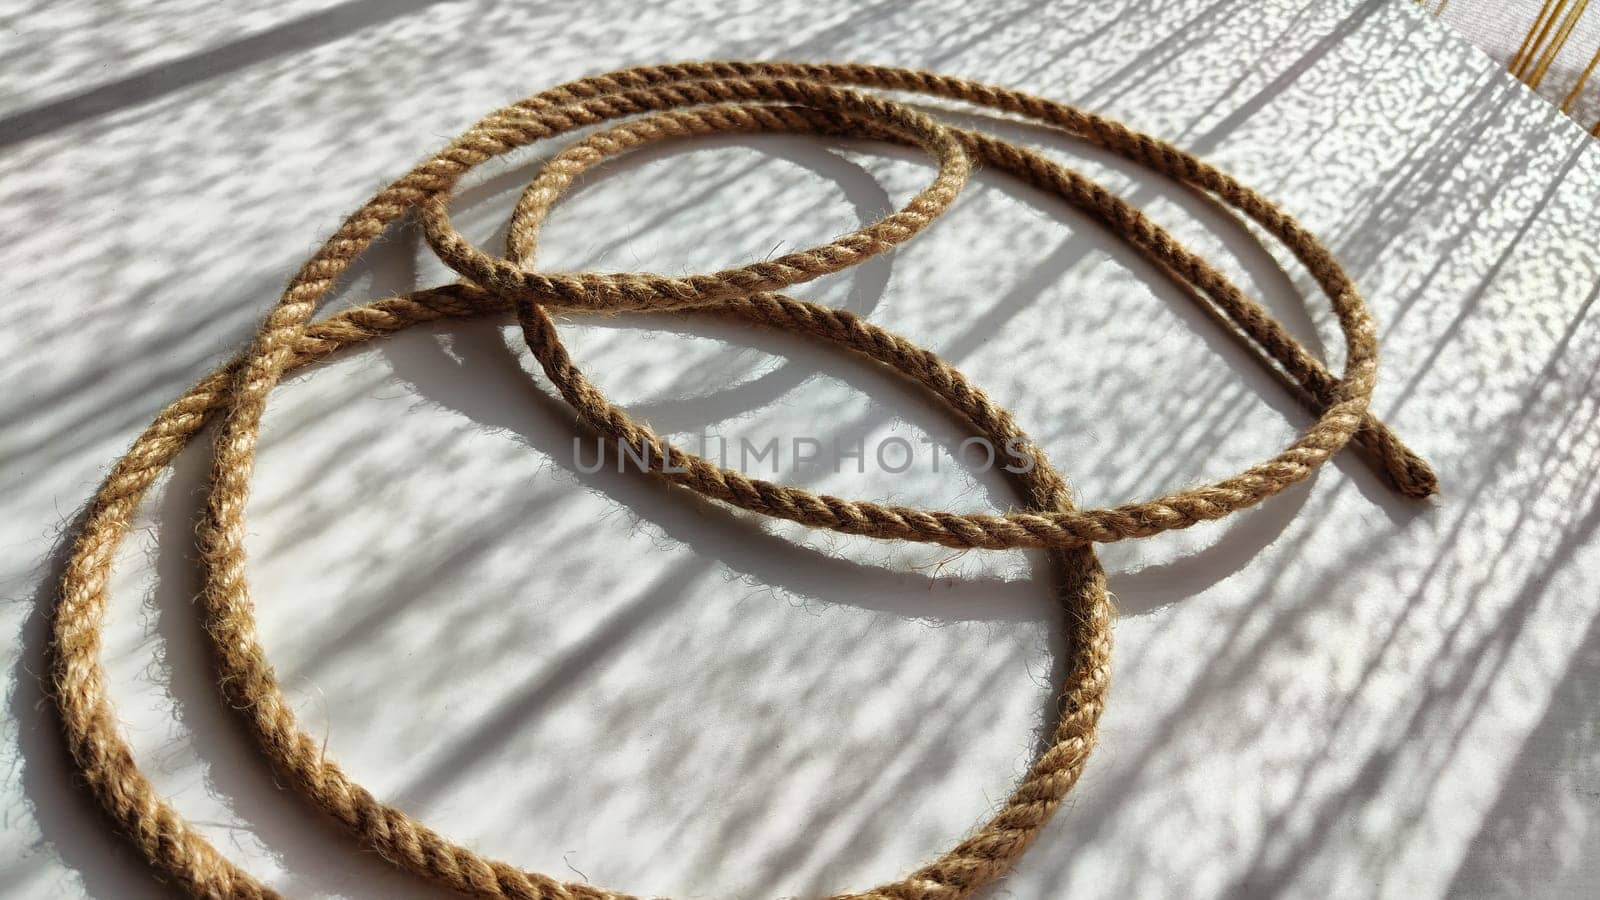 Jute twisted rope lying on a white surface with shadows from the sun. Abstract background, texture, pattern, frame by keleny